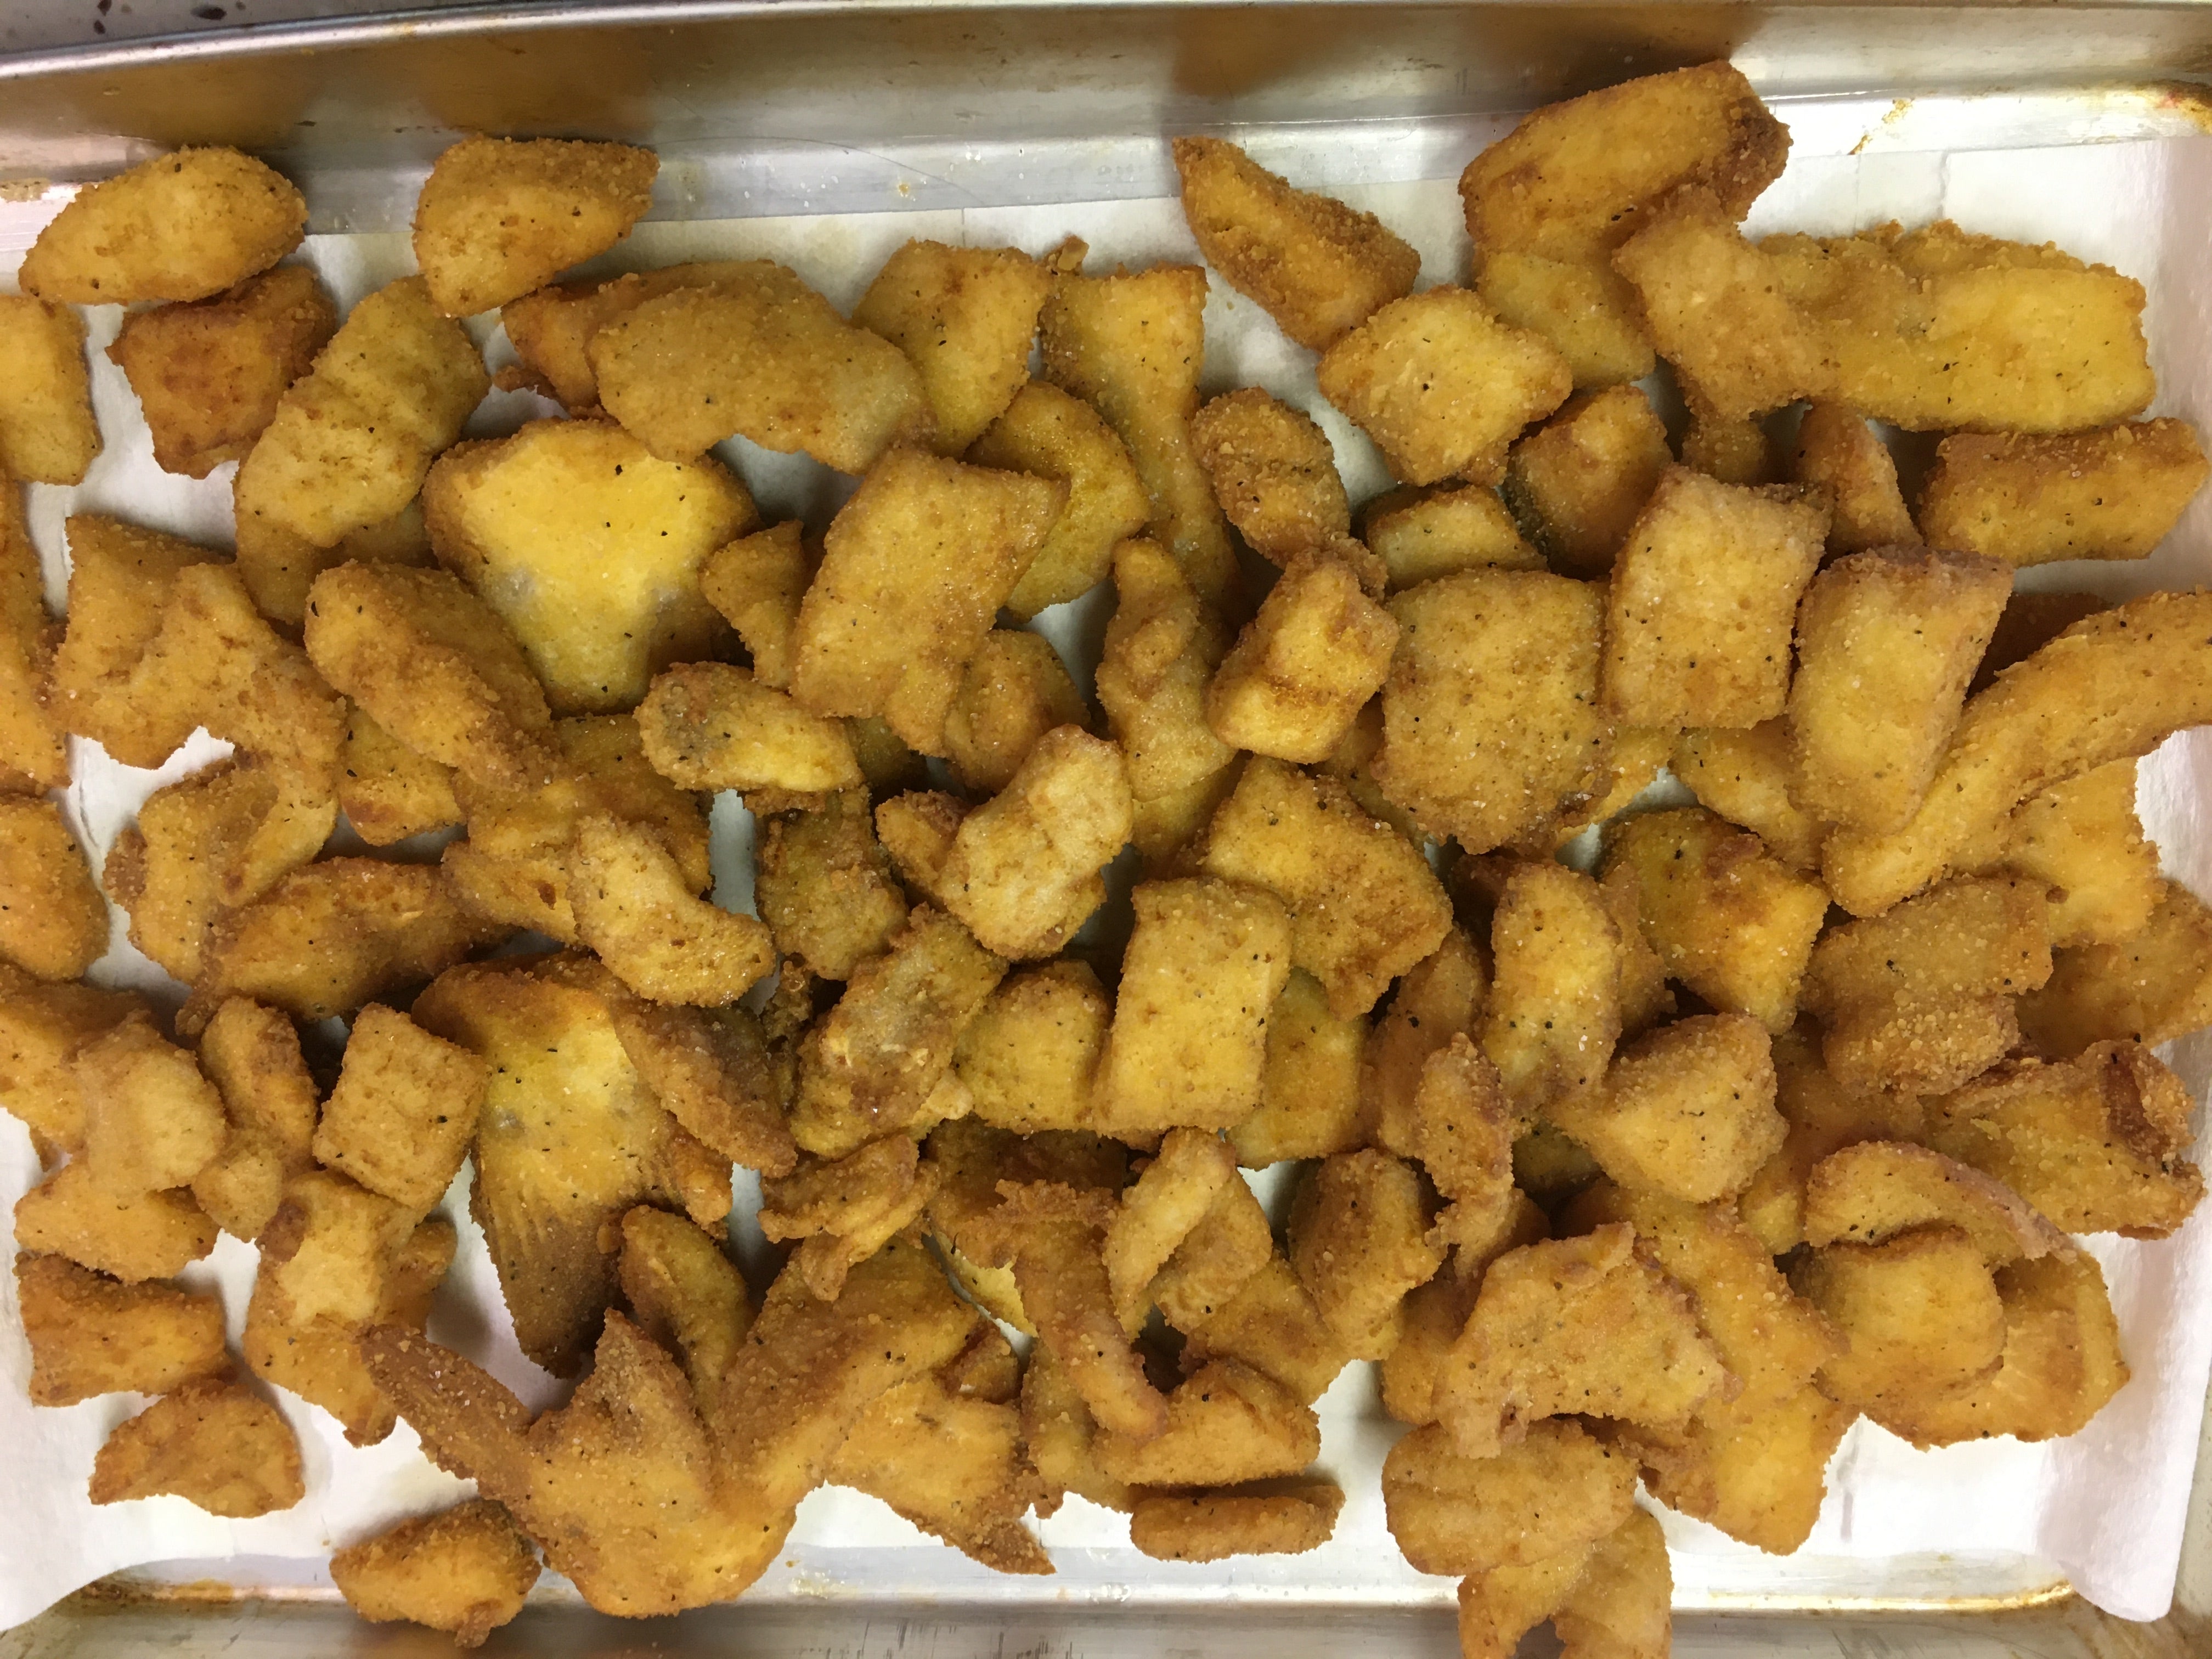 Making Delicious Walleye Bites - Patrick Shares His Recipe for a Mouthwatering Walleye Appetizer :)